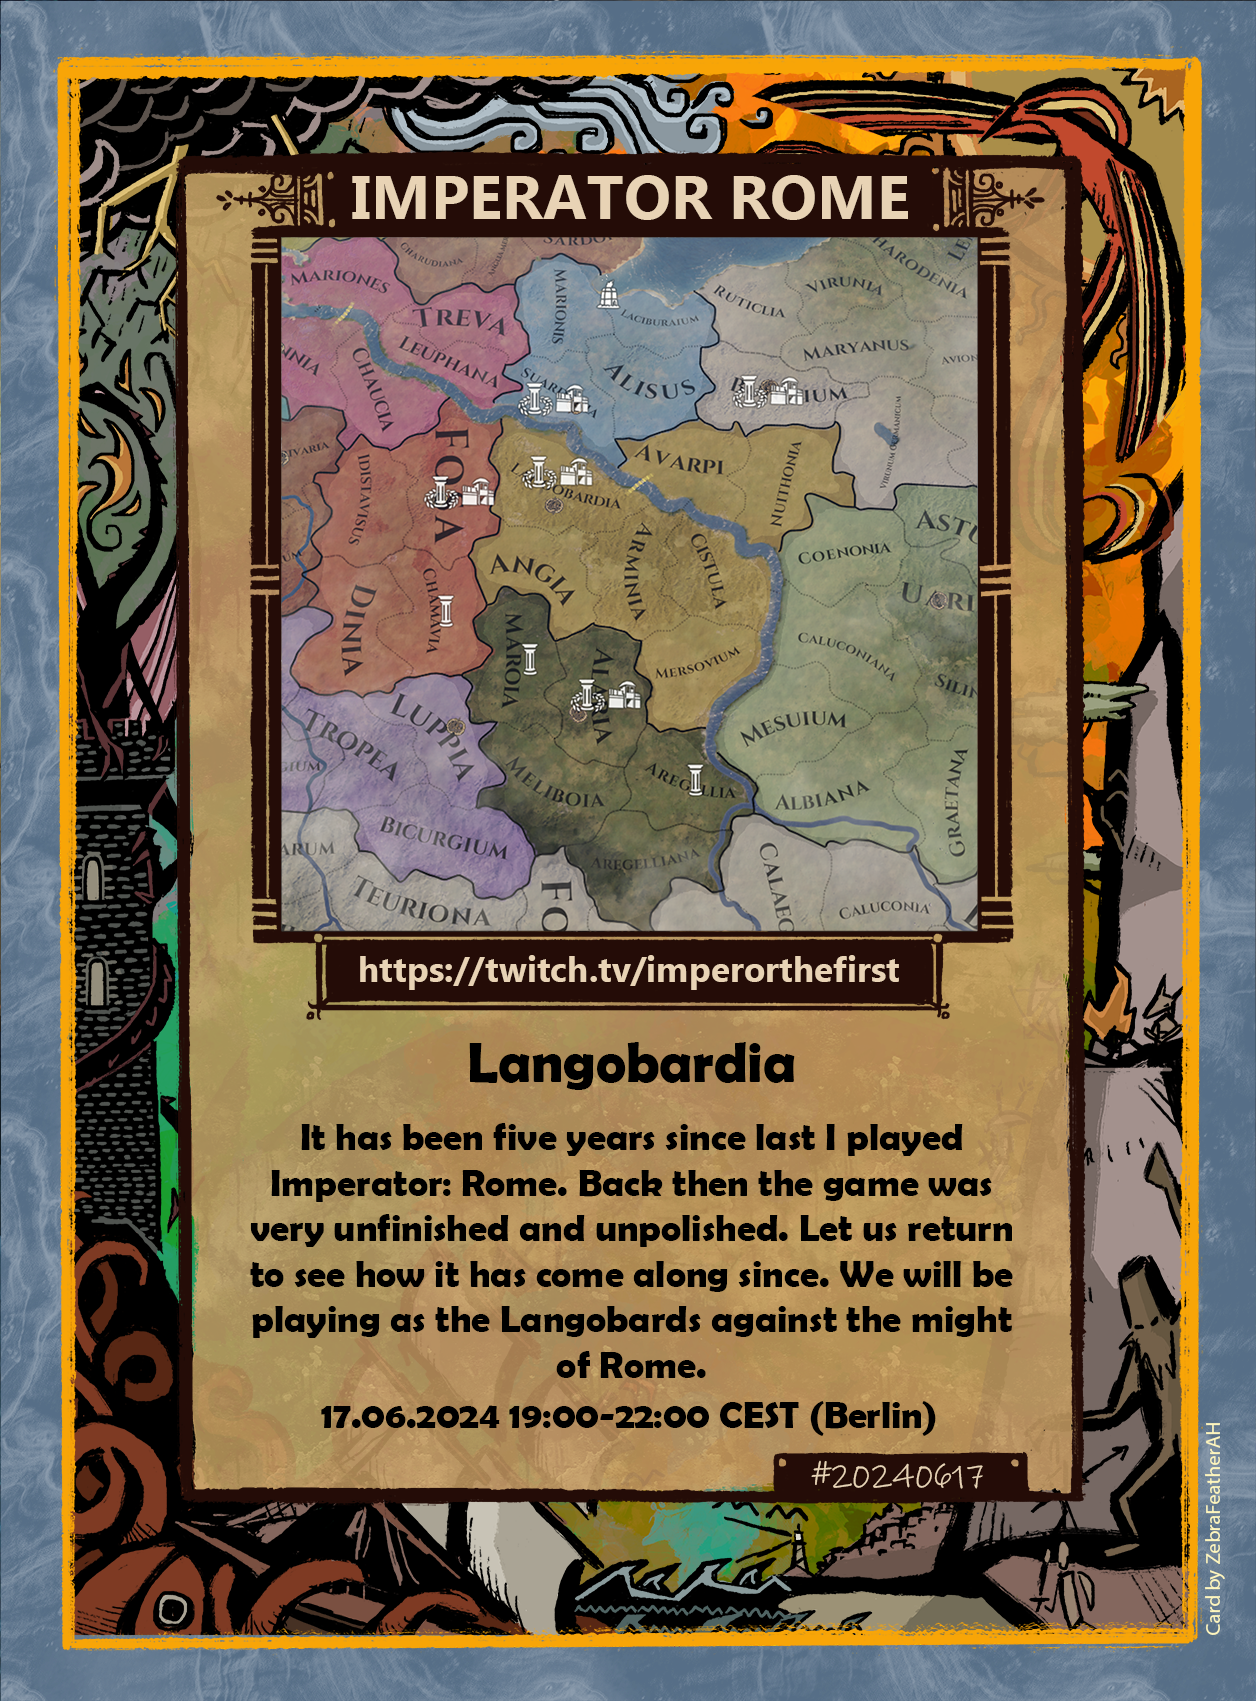 The image is a promotional card for a Twitch streaming event related to the game "Imperator Rome." The card features an illustration of a detailed map from the game, showing various regions and territories with names and symbols indicating settlements and landmarks.

At the top of the card, there is a title that reads "IMPERATOR ROME" in bold letters. Below the title, there is a Twitch URL: "https://twitch.tv/imperorthefirst" 

The main body of the card contains text describing the event:

"Langobardia

It has been five years since last I played Imperator: Rome. Back then the game was very unfinished and unpolished. Let us return to see how it has come along since. We will be playing as the Langobards against the might of Rome."

At the bottom of the card, there is a date and time for the event: "17.06.2024 19:00-22:00 CEST (Berlin)"

The border of the card is decorated with a colorful, intricate design featuring stylized fantasy scenes such as a dragon atop a tower, a kraken taking a ship, a phoenix flying, an imp by a fire, and some warriors fighting a bigfoot. There is a small hashtag "#20240617" in the bottom right corner, and a credit in the lower right corner that reads: "Card by ZebraFeatherAH."